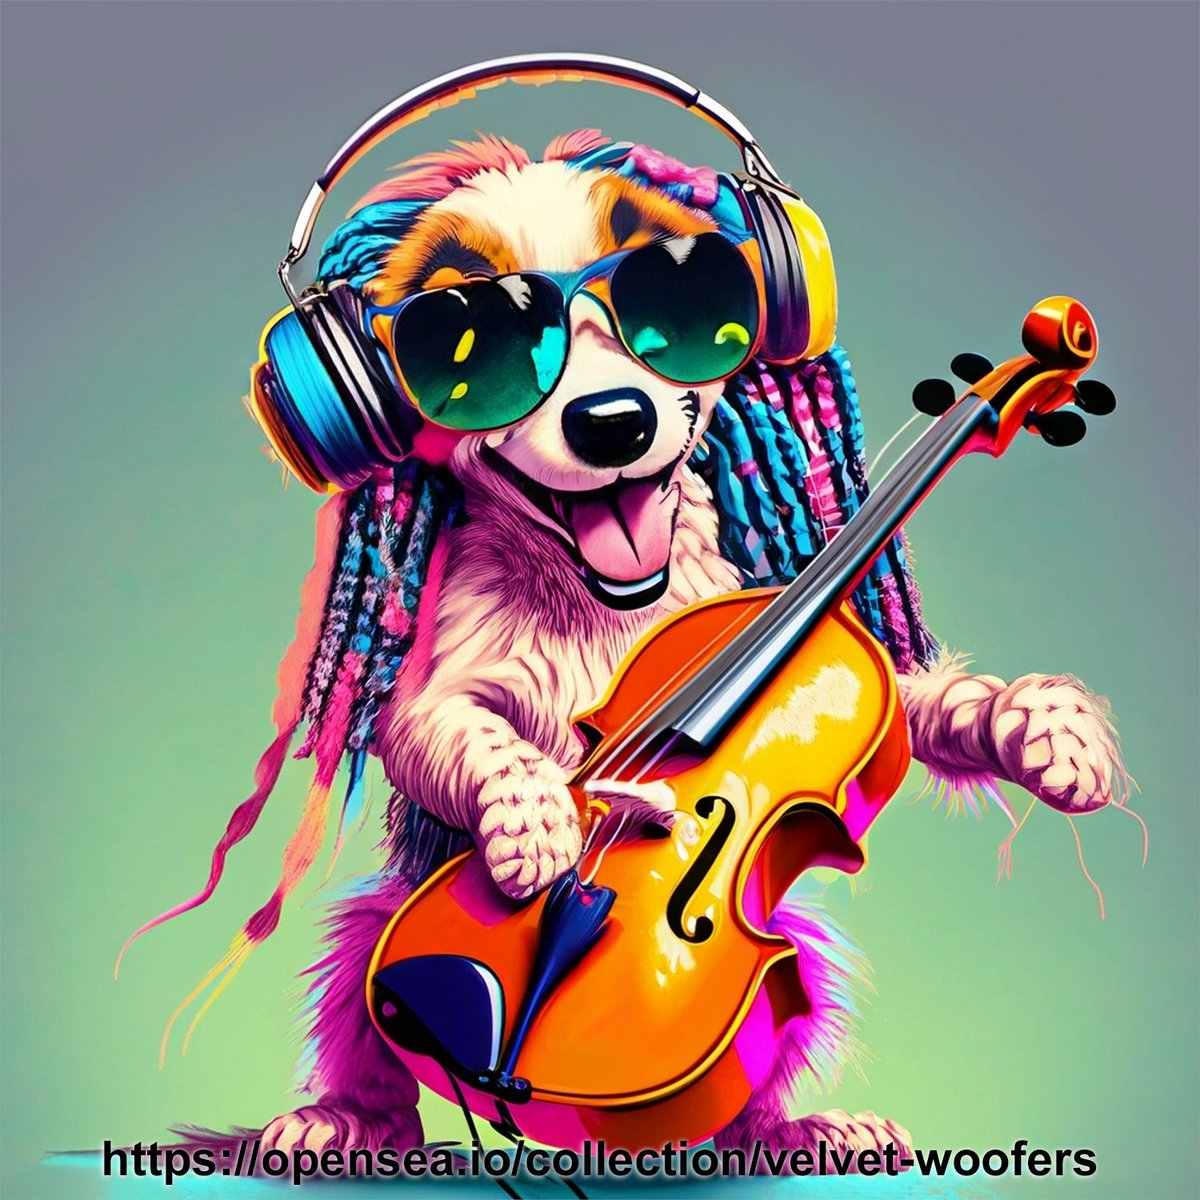 String Player for the Velvet Woofers🐶

opensea.io/collection/vel…

#VelvetWoofers #BarkAndRoll #NFTArt #PopArtMusic #rockband #rockandroll #strings #stringplayer #doublebass #standupbass #cello #celloplayer #bassplayer #DogBand #CollectibleNFTs #NFTCollection #NFTCommunity #NFT